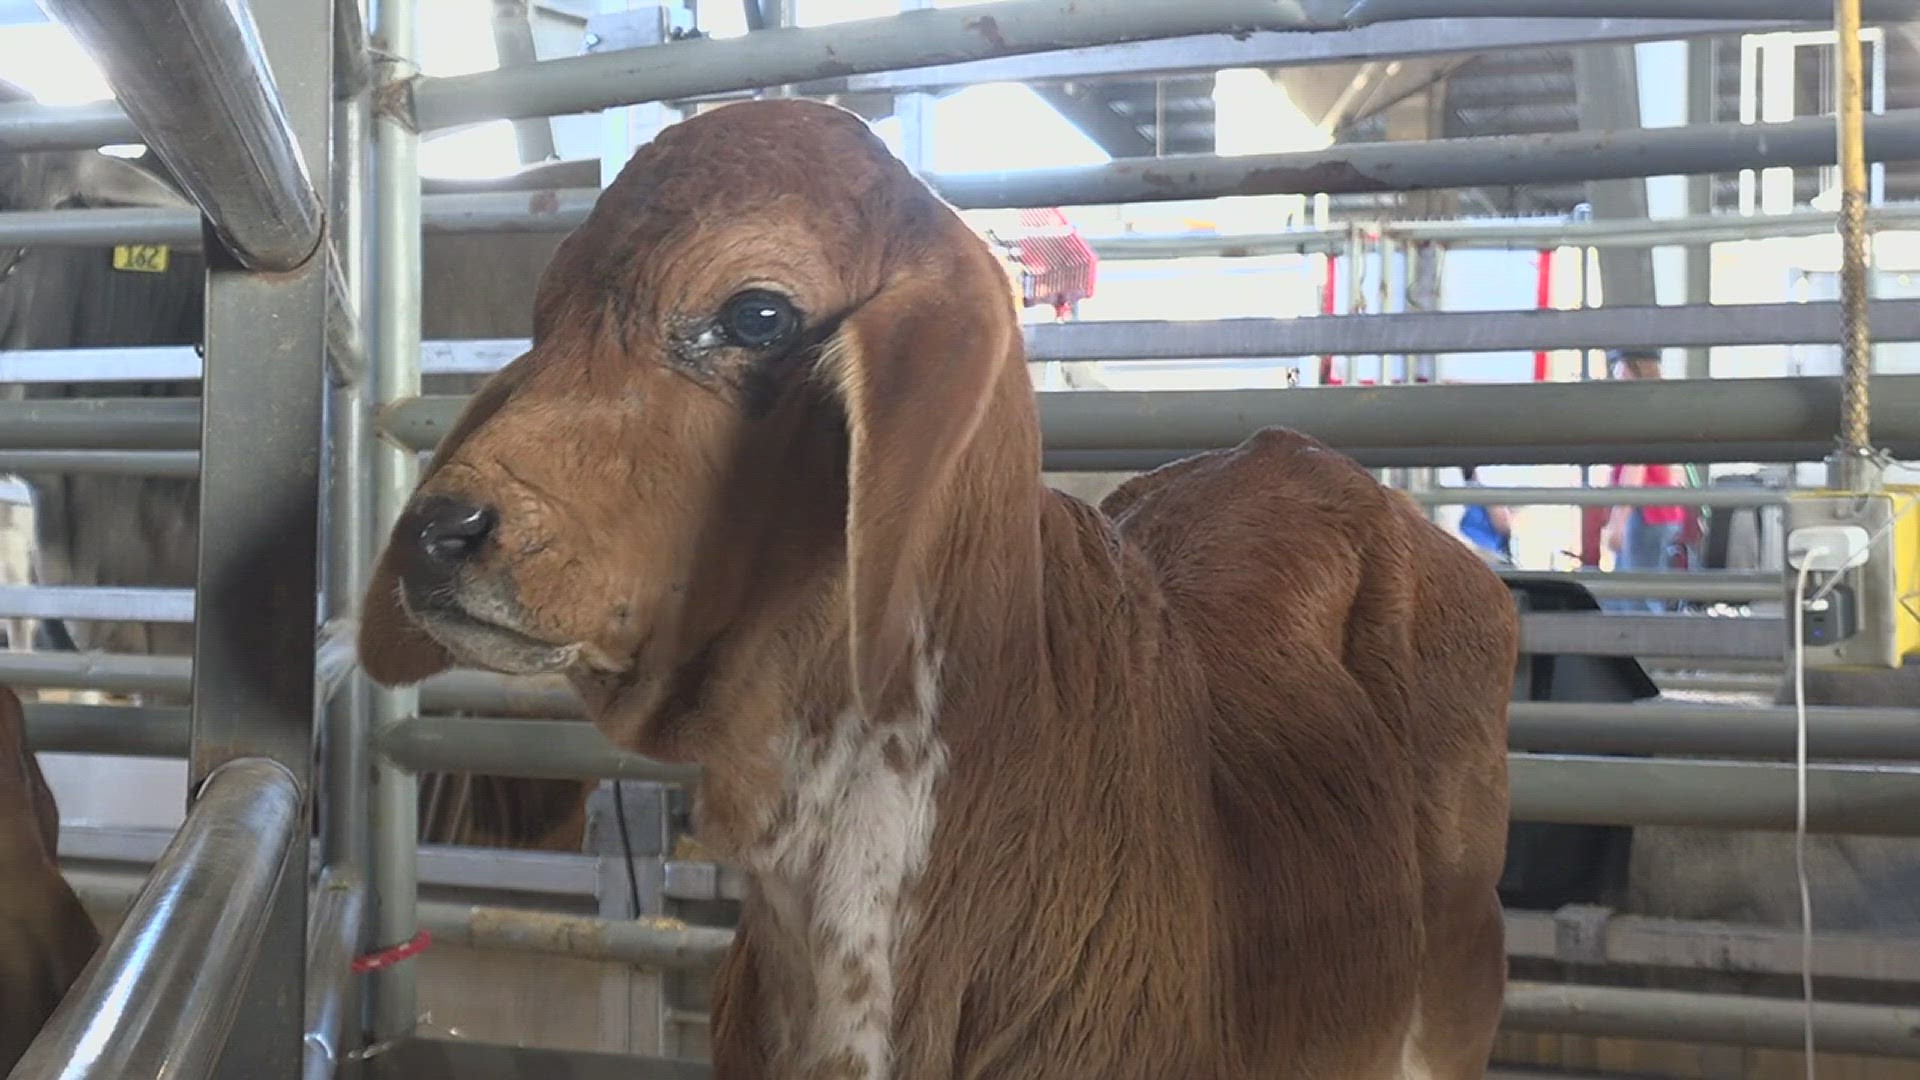 Cowgirls and cowboys from across the country made their way to the YMBL to show off their prized livestock.